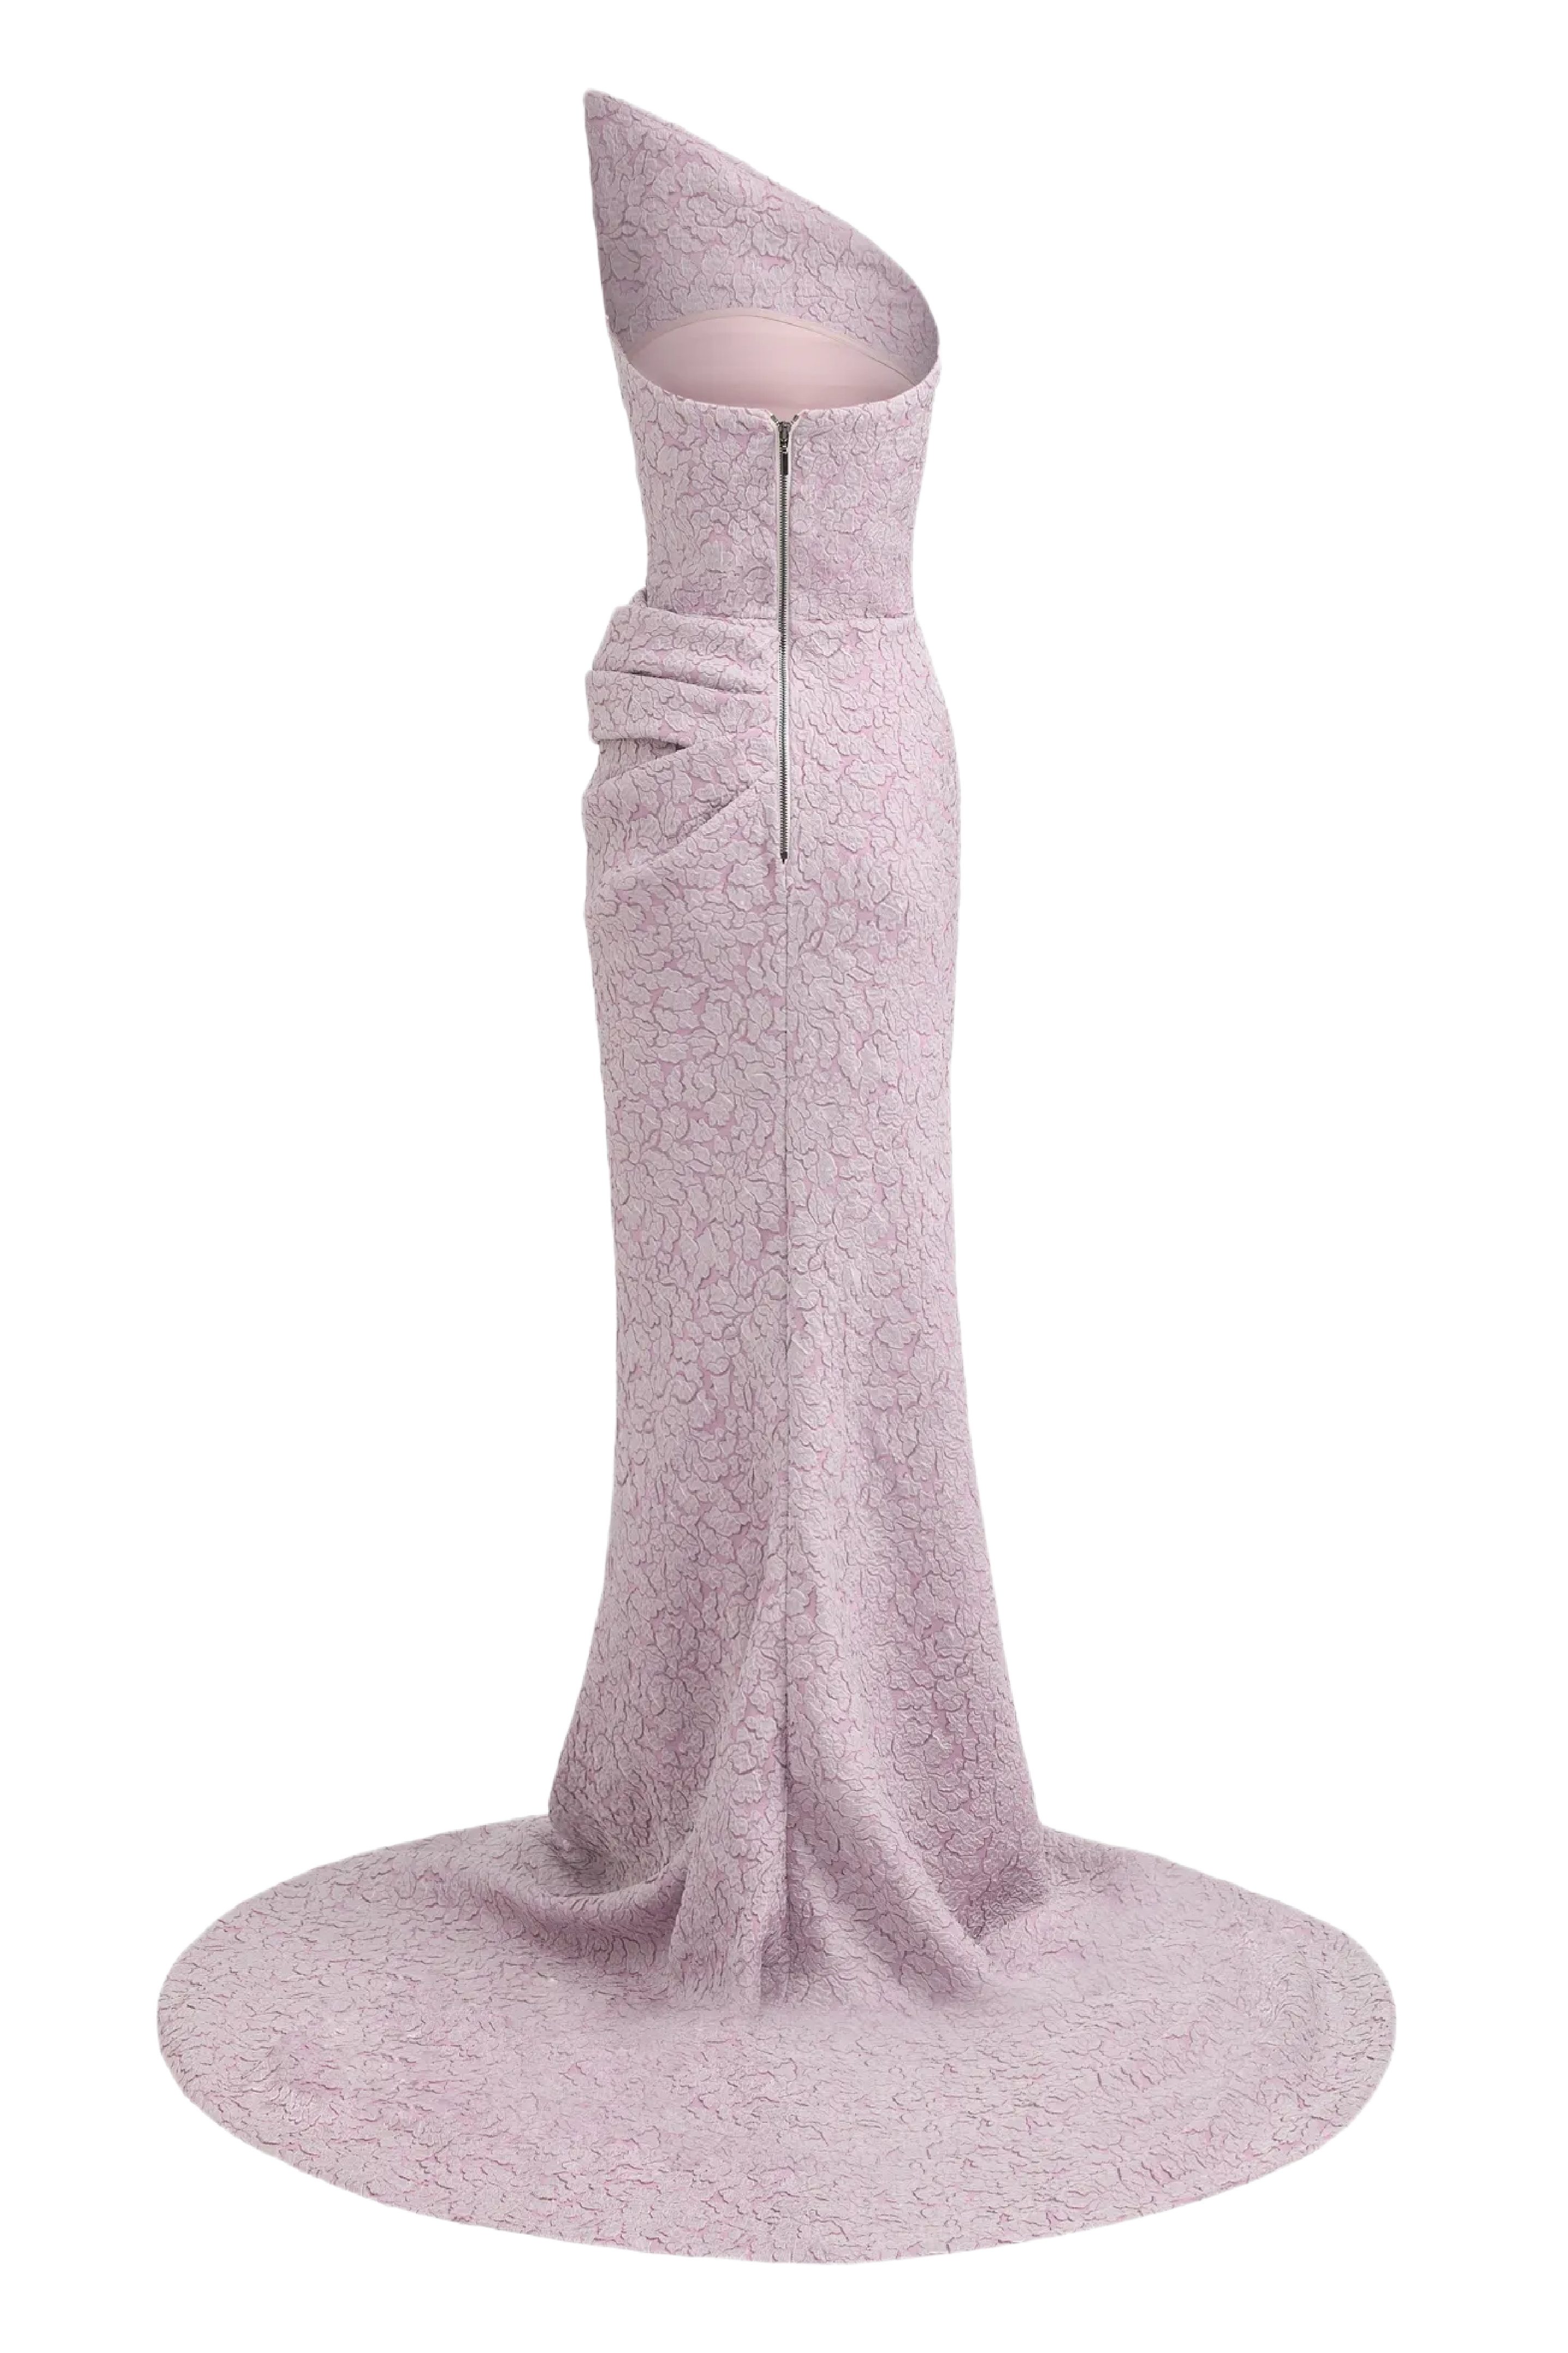 Dare Gown in Rose Frost